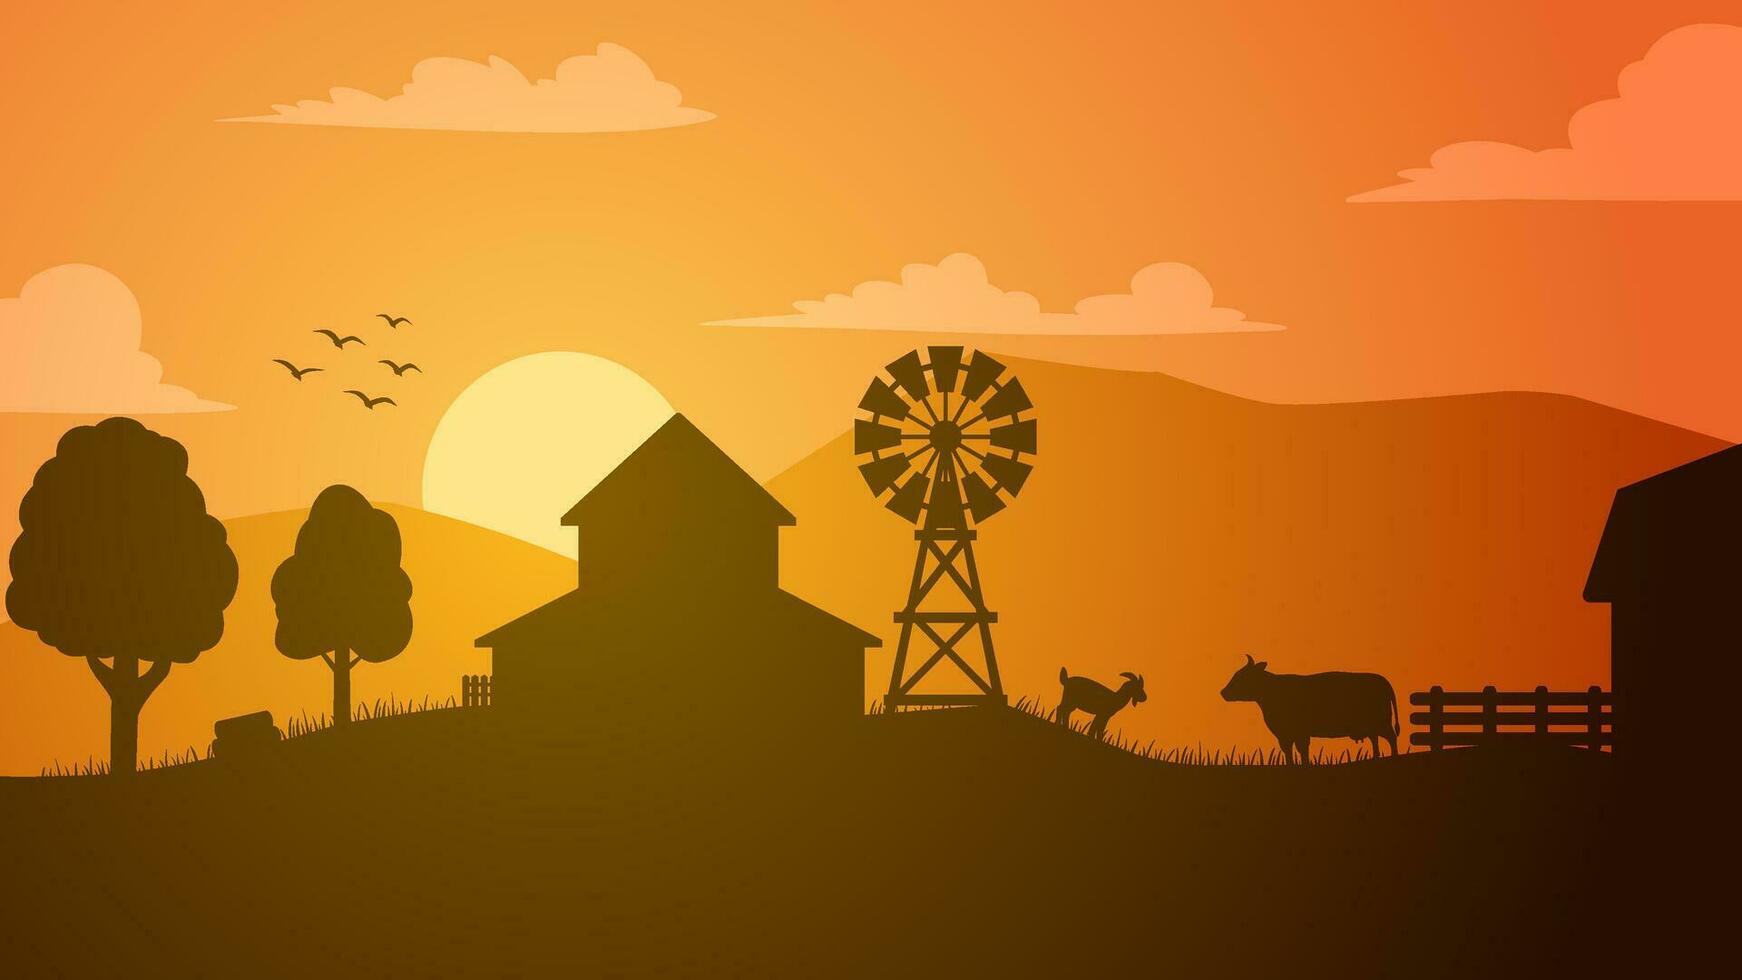 Farmland landscape vector illustration. Countryside silhouette with livestock cow and goat. Rural agriculture landscape for illustration, background or wallpaper